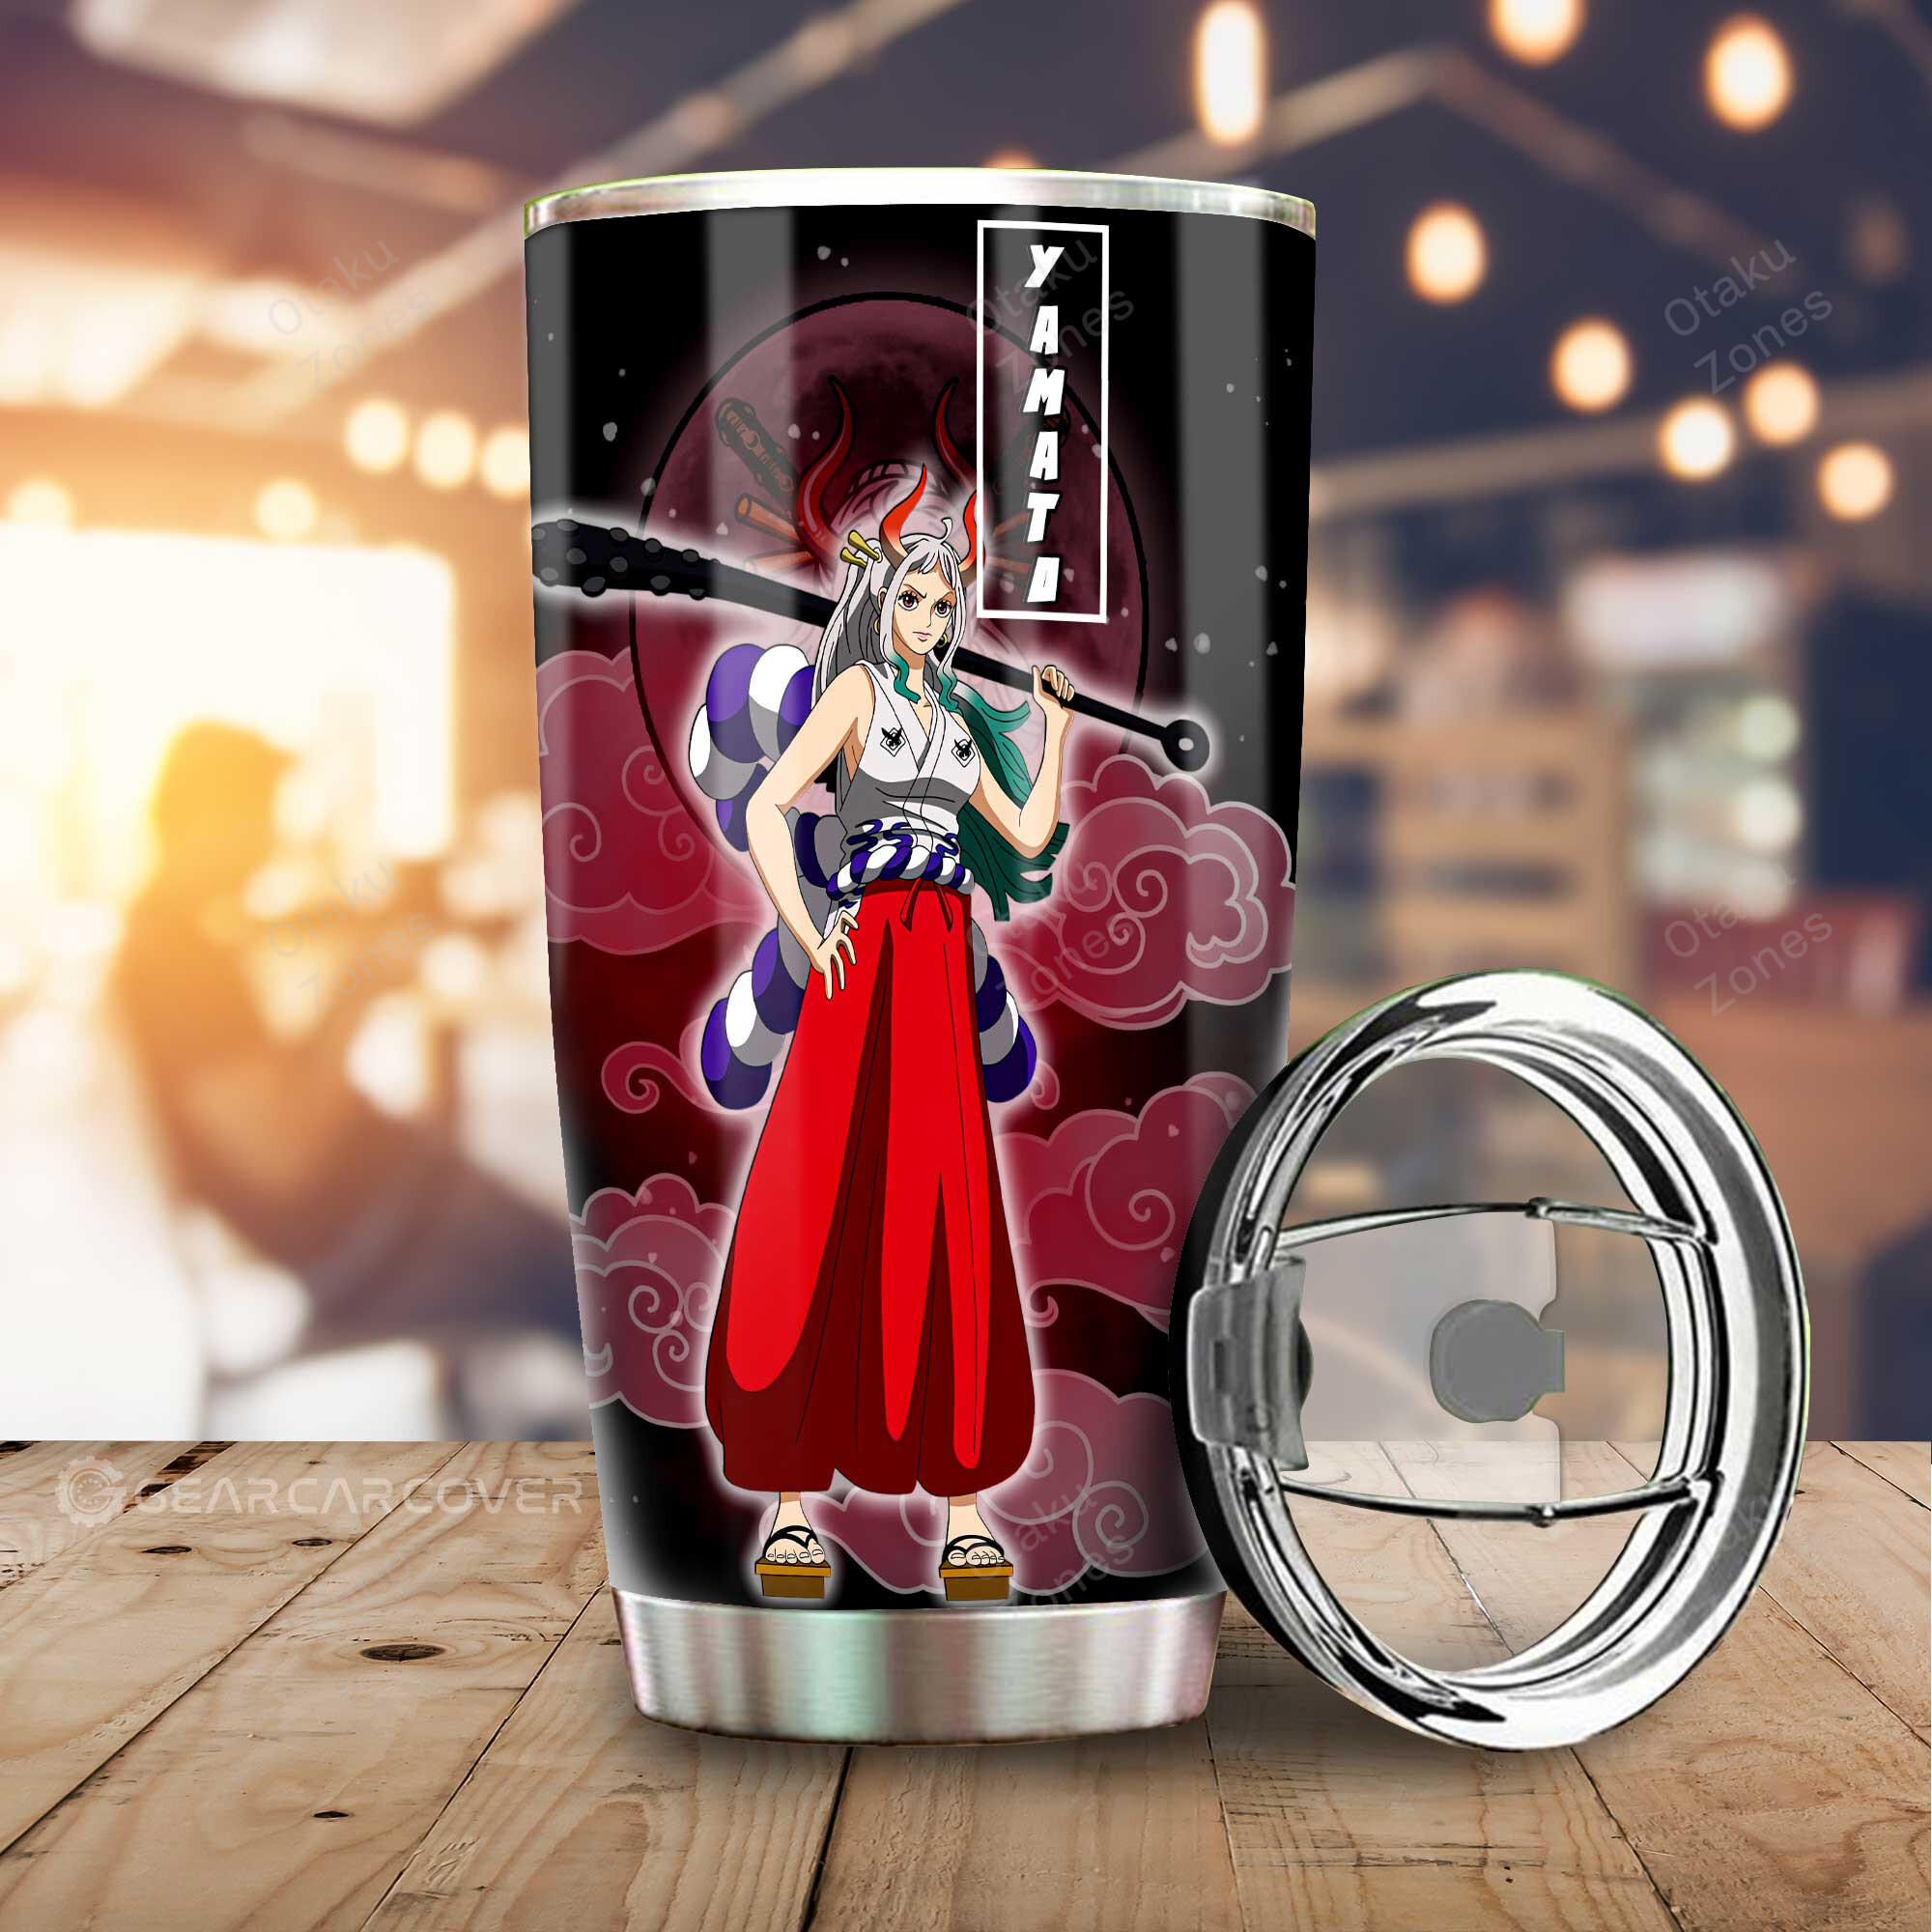 Show off your favorite Anime character in style with these products 3